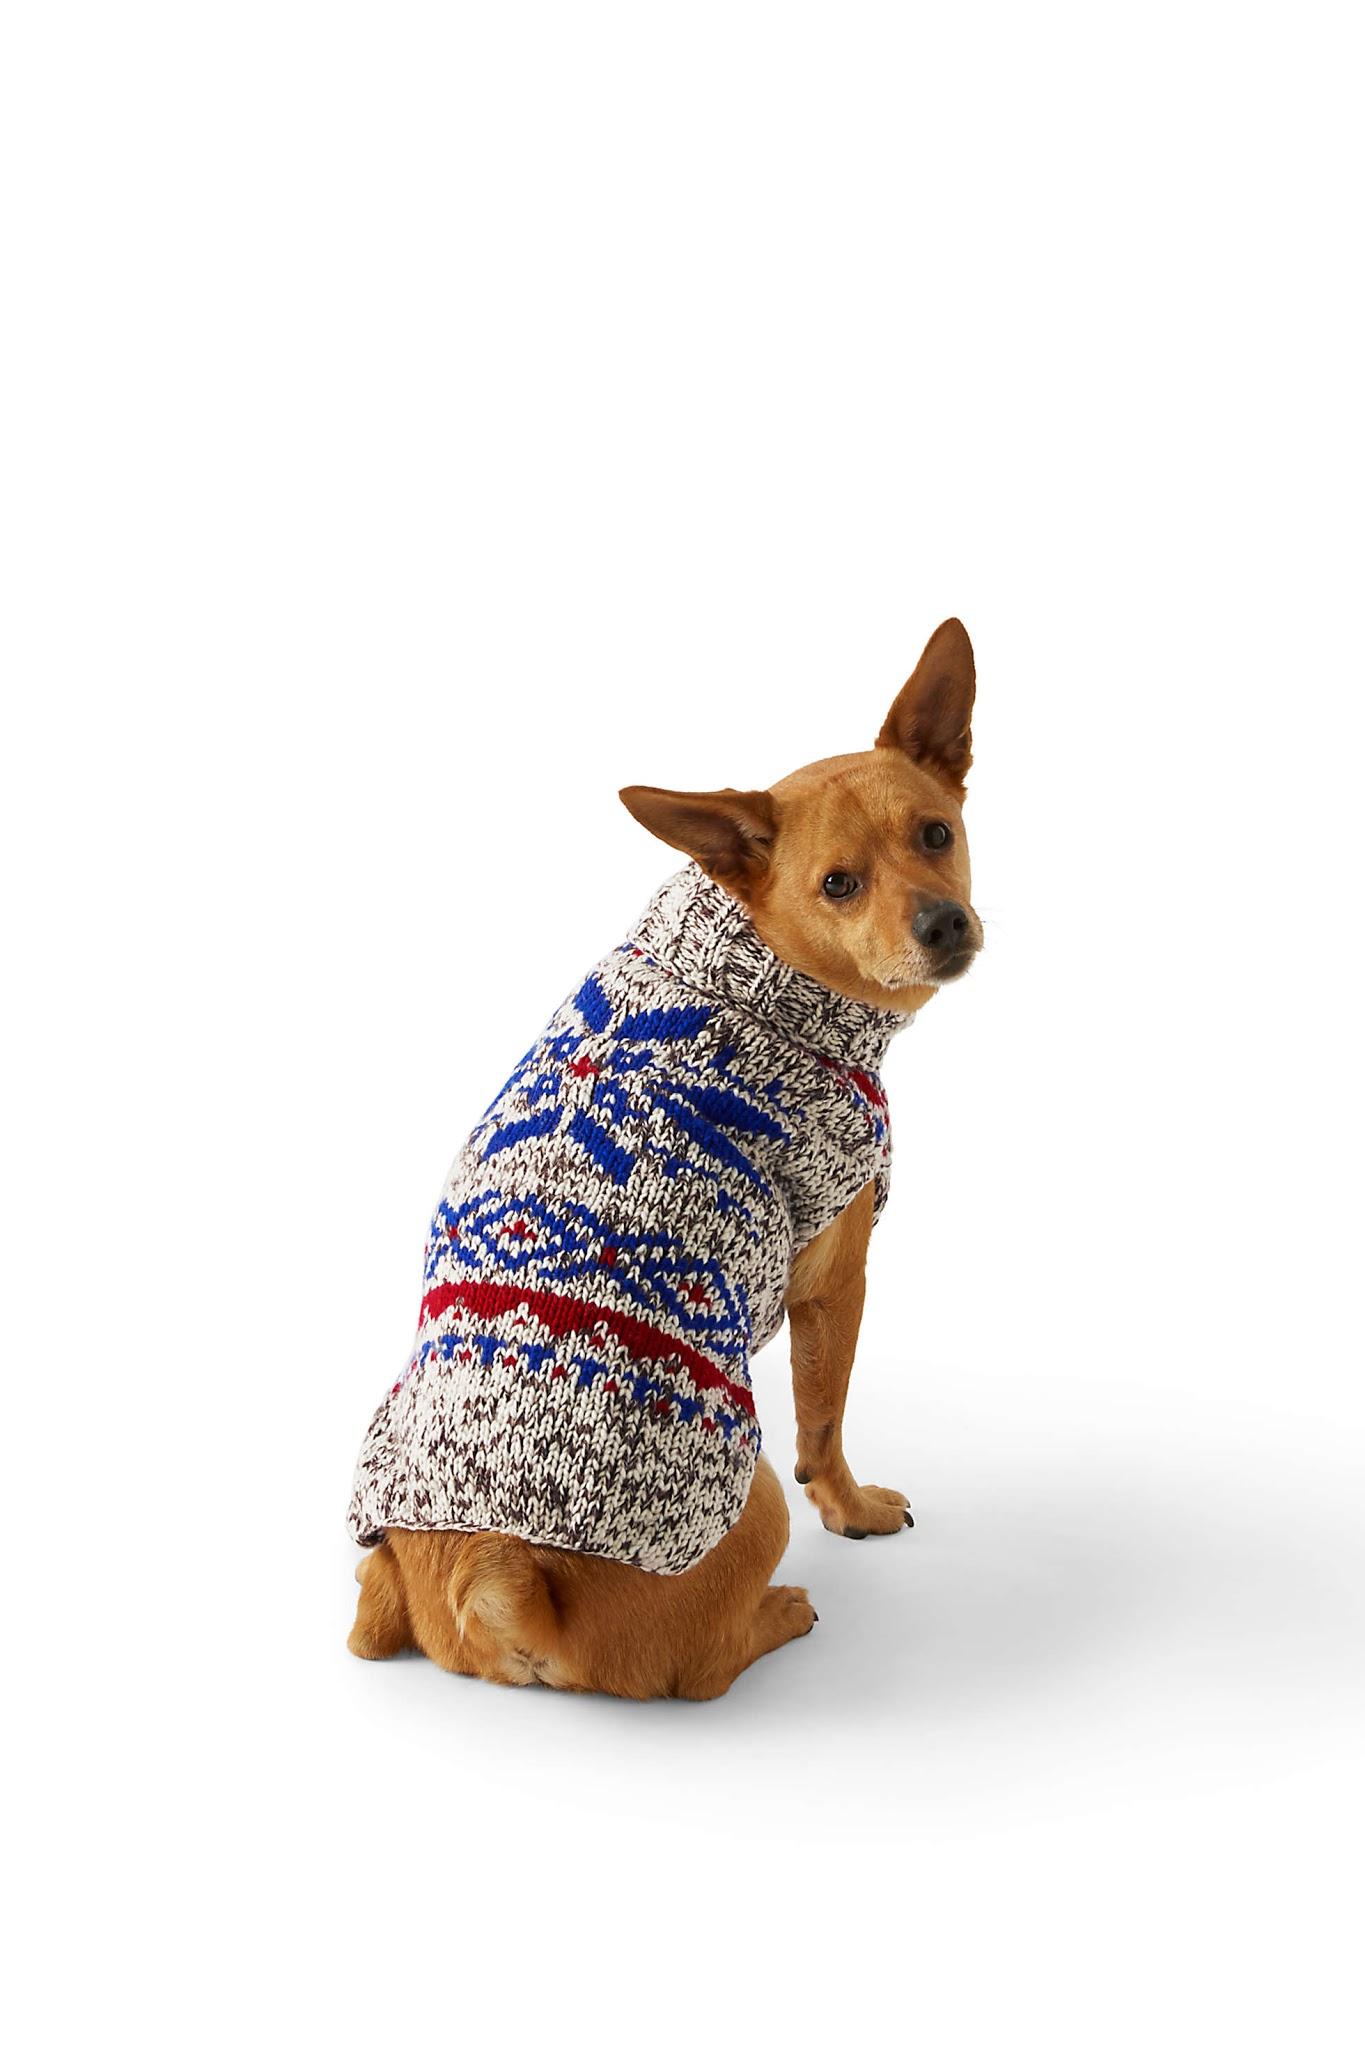 12 Awesome Christmas Sweaters! 136